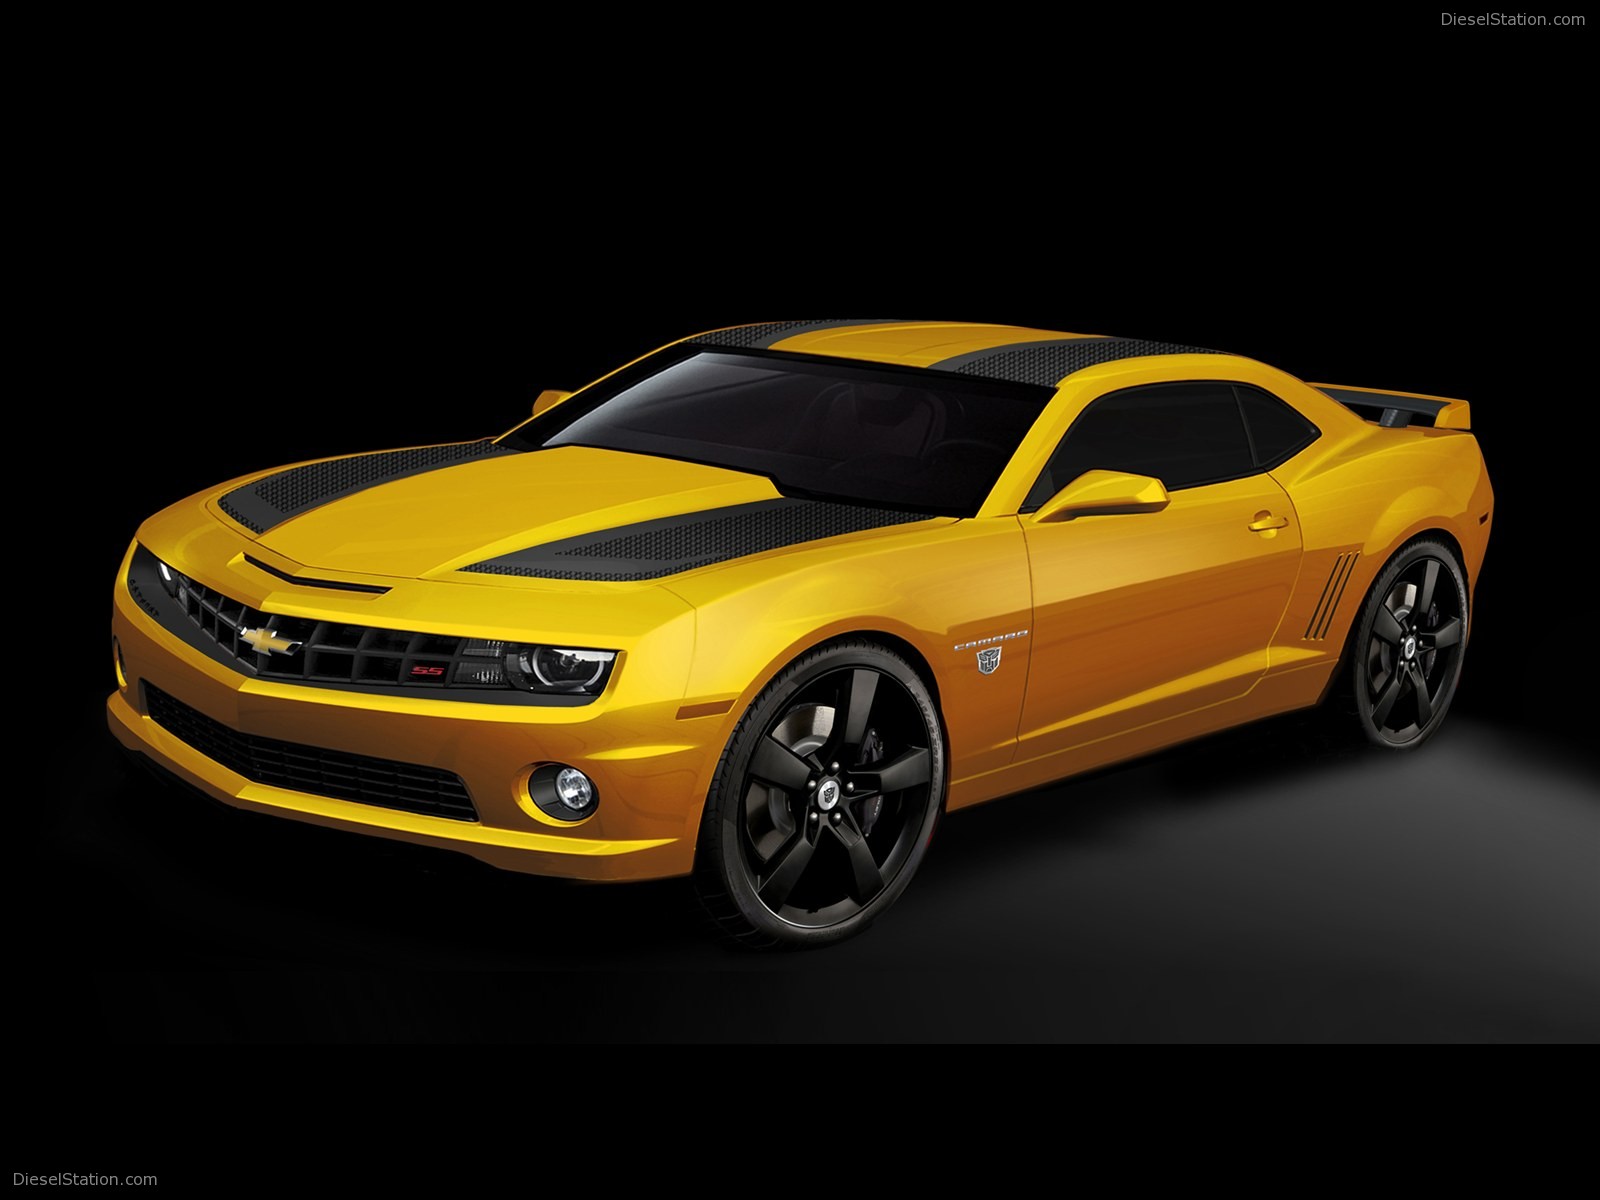 Chevy Camaro Wallpaper 4881 Hd Wallpapers in Cars   Imagescicom 1600x1200